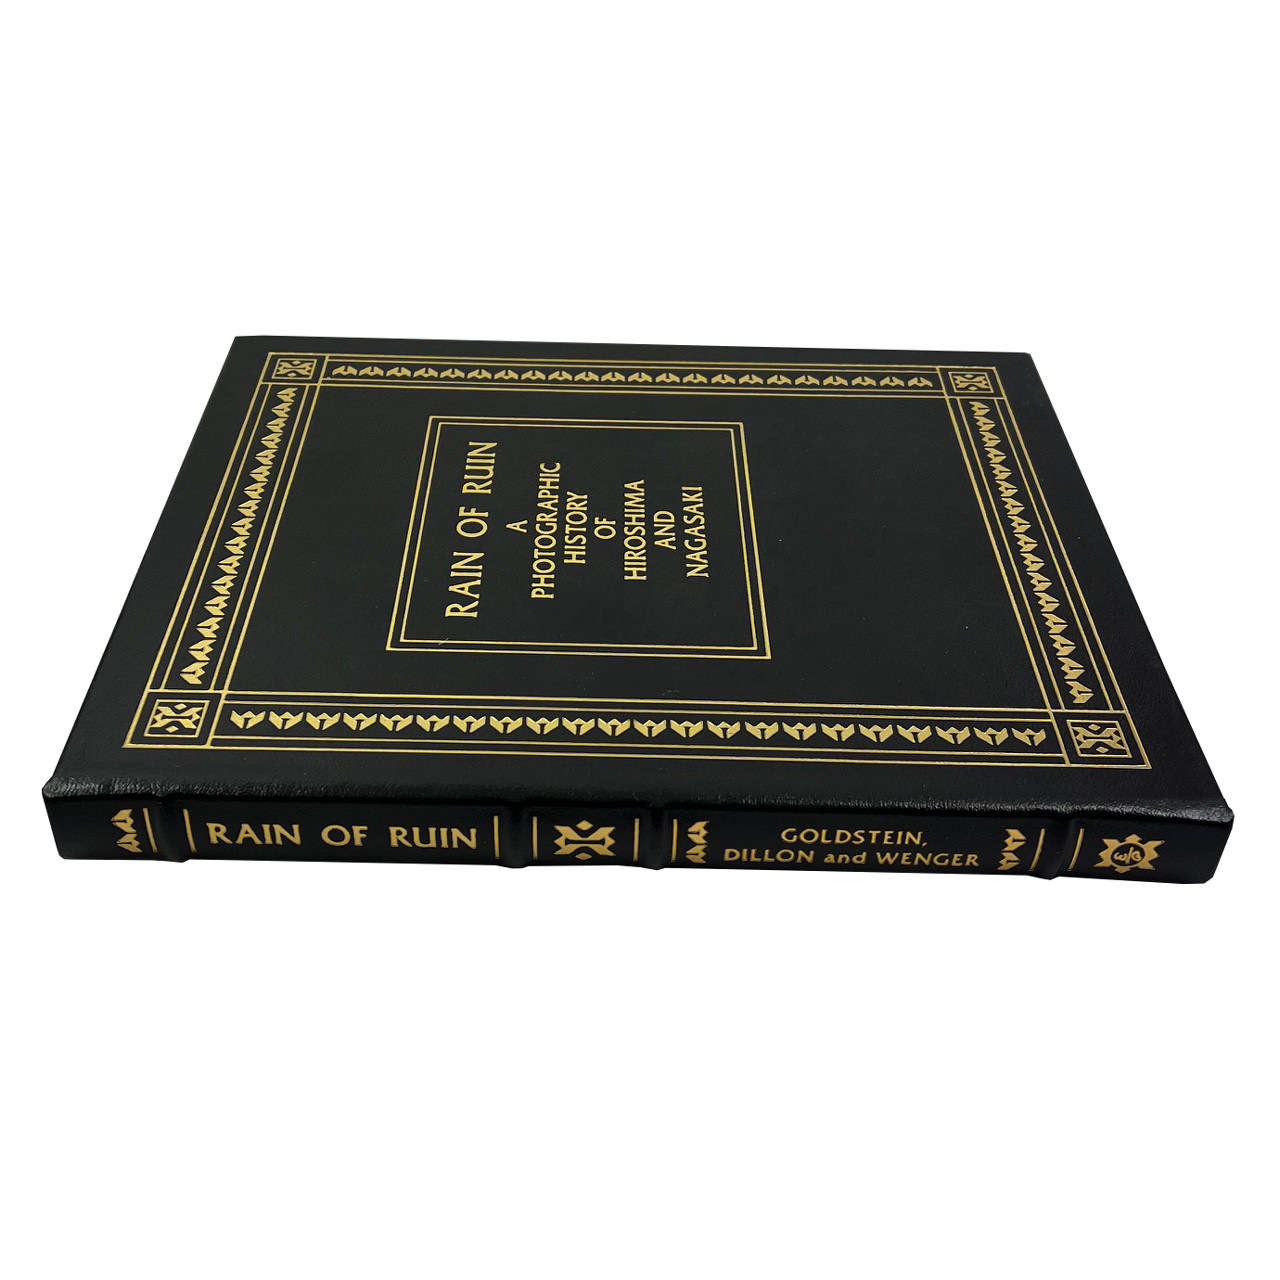 Donald M. Goldstein, Katherine V. Dillon, and J. Michael Wenger "Rain Of Ruin: A Photographic History of Hiroshima and Nagasaki" Deluxe Limited Edition, Leather Bound Collector's Edition